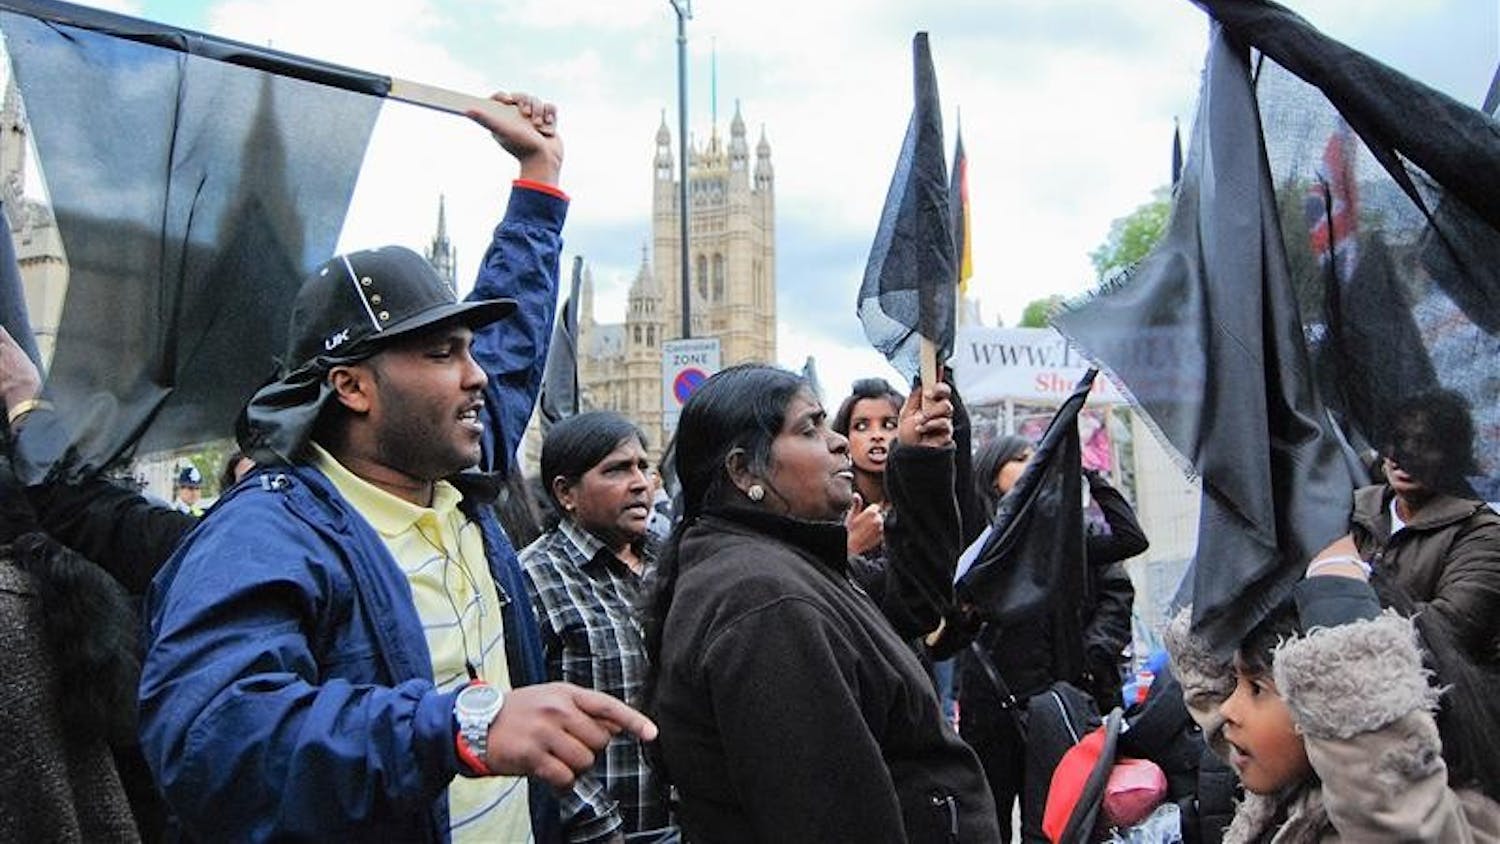 British Tamils gather to support Sri Lanka's Tamil community in Sri Lanka during a vigil Friday afternoon at the Houses of Parliament in London.